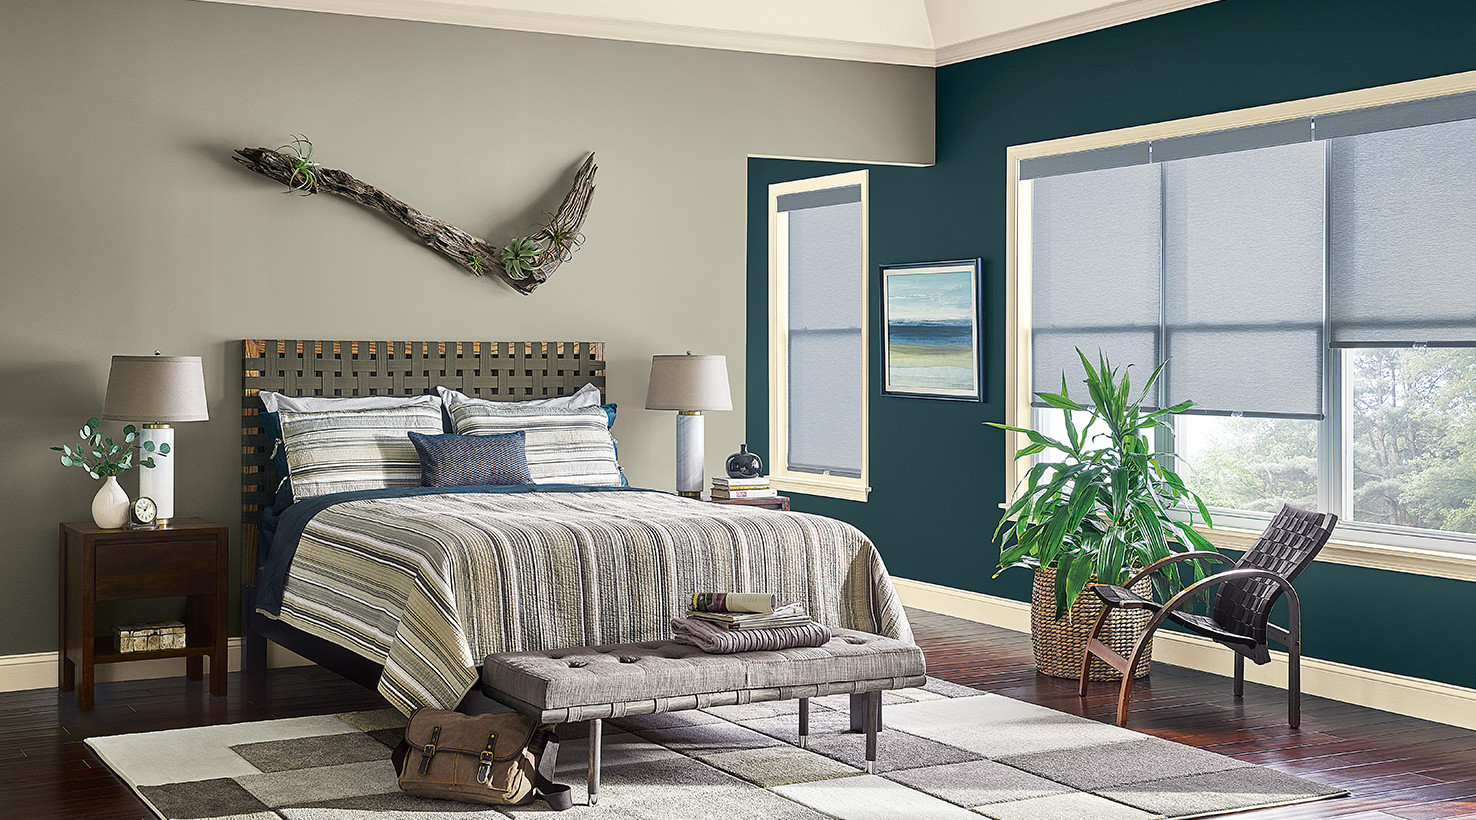 23 Fascinating Sherwin Williams Bedroom Colors Home, Family, Style